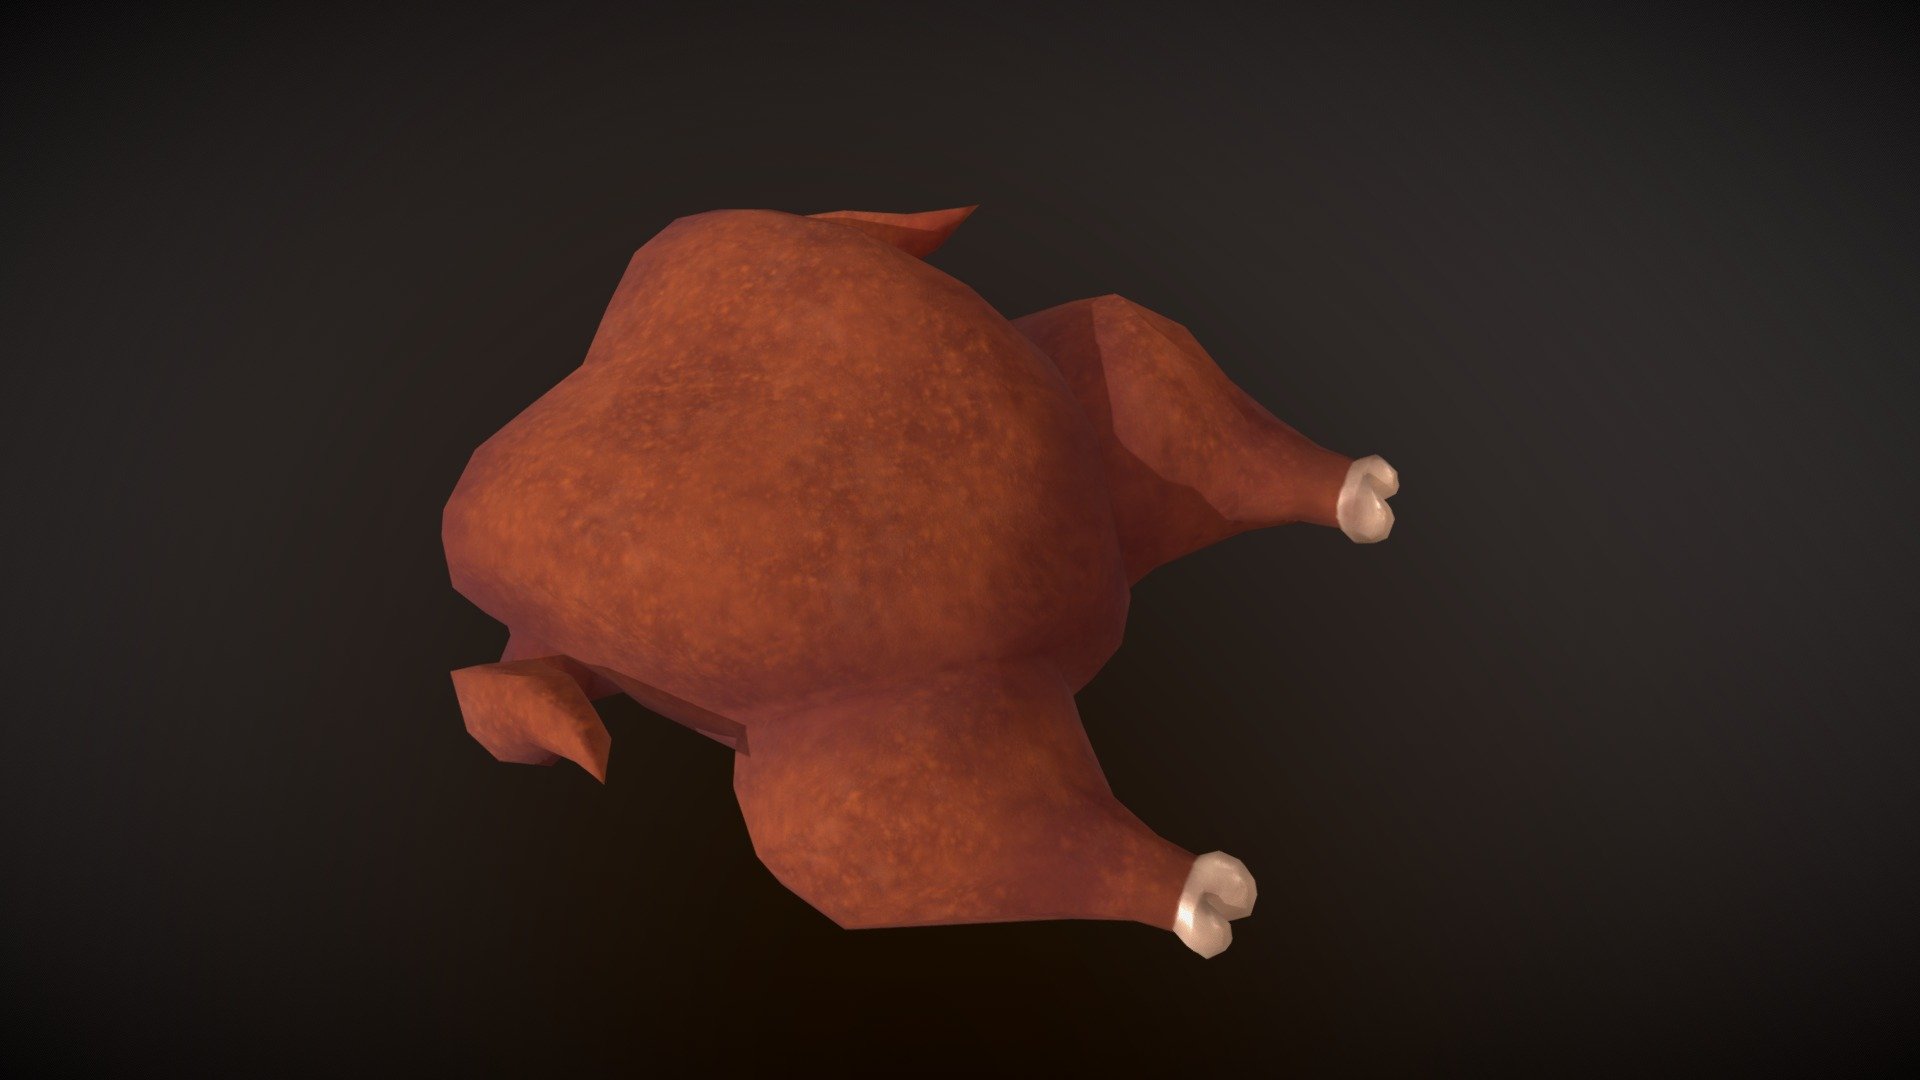 Stylized fantasy low poly game asset in cartoon handpainted style. Hand painted game ready low polyroasted chicken dish prop with 2k PNG Color and Roughness. Ideal for fantasy tavern, kitchen, pub, feast and table setting environment. Please check other stylized props in my collection and feel free to connect with me if you have any questions.


SketchfabWeeklyChallenge - Stylized lowpoly roasted chicken - Buy Royalty Free 3D model by Scritta 3d model